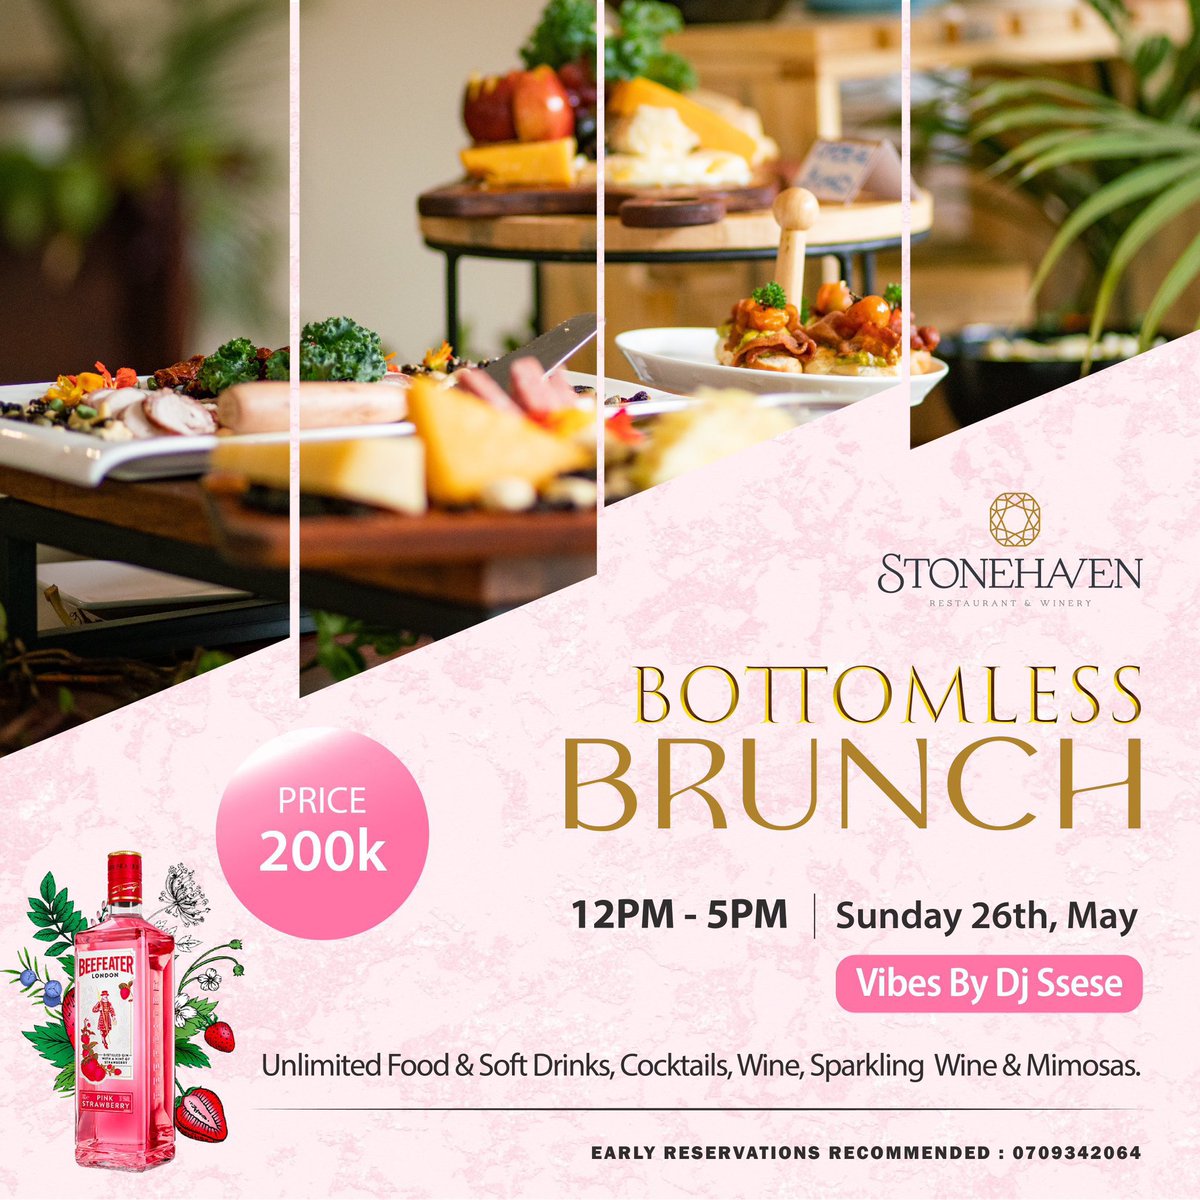 📌STONEHAVEN BOTTOMLESS BRUNCH 

Sunday 26th May 

📍@Stonehavenkla 

Make your reservations today. Call 0709342064 for reservations. 

Indulge in unlimited food and drinks as you relax and enjoy groovy vibes.

Vibes served by @DJ_Ssese